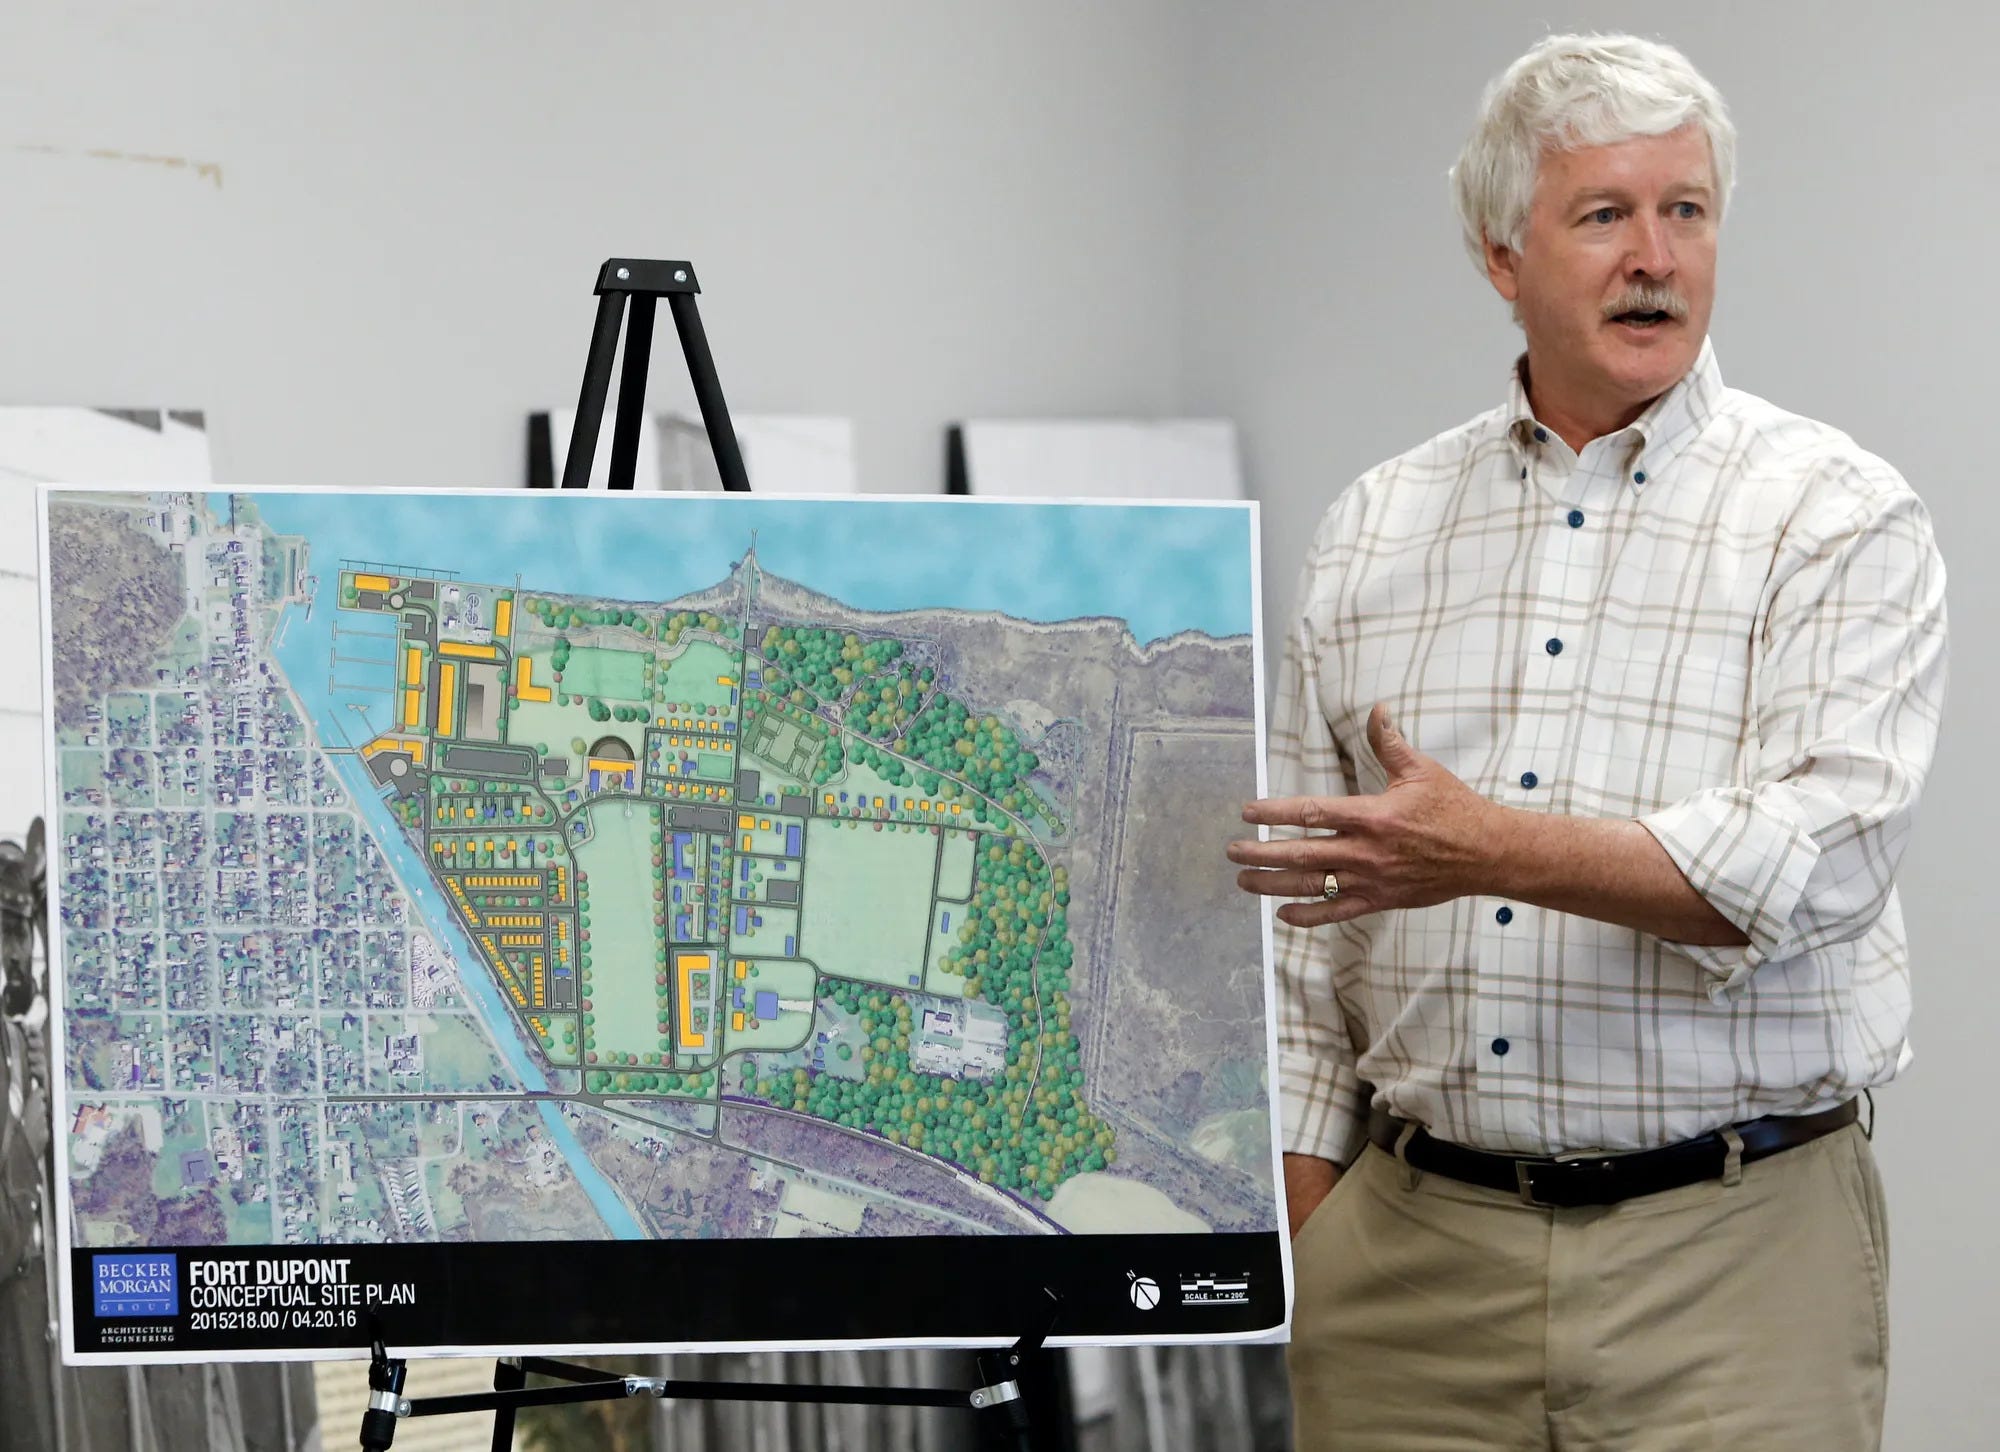 Jeff Randol presents a master plan for the redevelopment of Fort DuPont at the Delaware City Library in 2016. Many credited Randol for developing infrastructure where it hardly existed before. Others criticized him for being unresponsive to the community's desires.